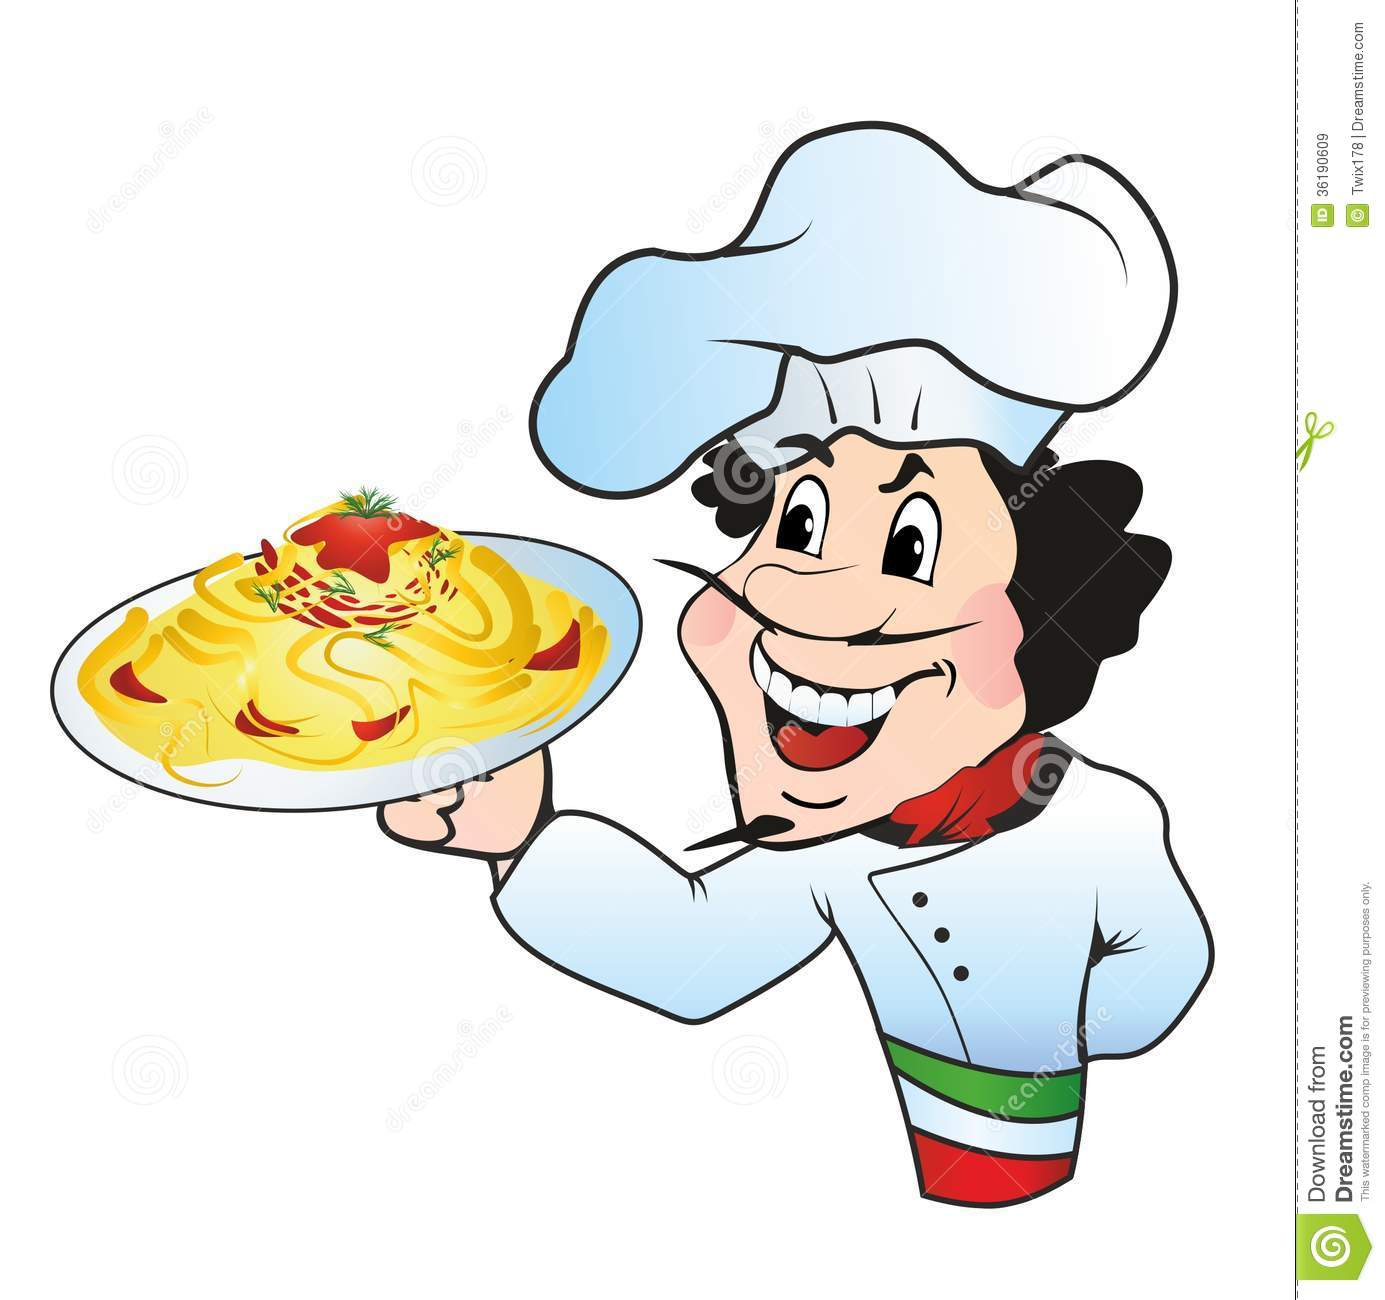 Chef With A Plate Of Spaghetti Royalty Free Stock Images   Image